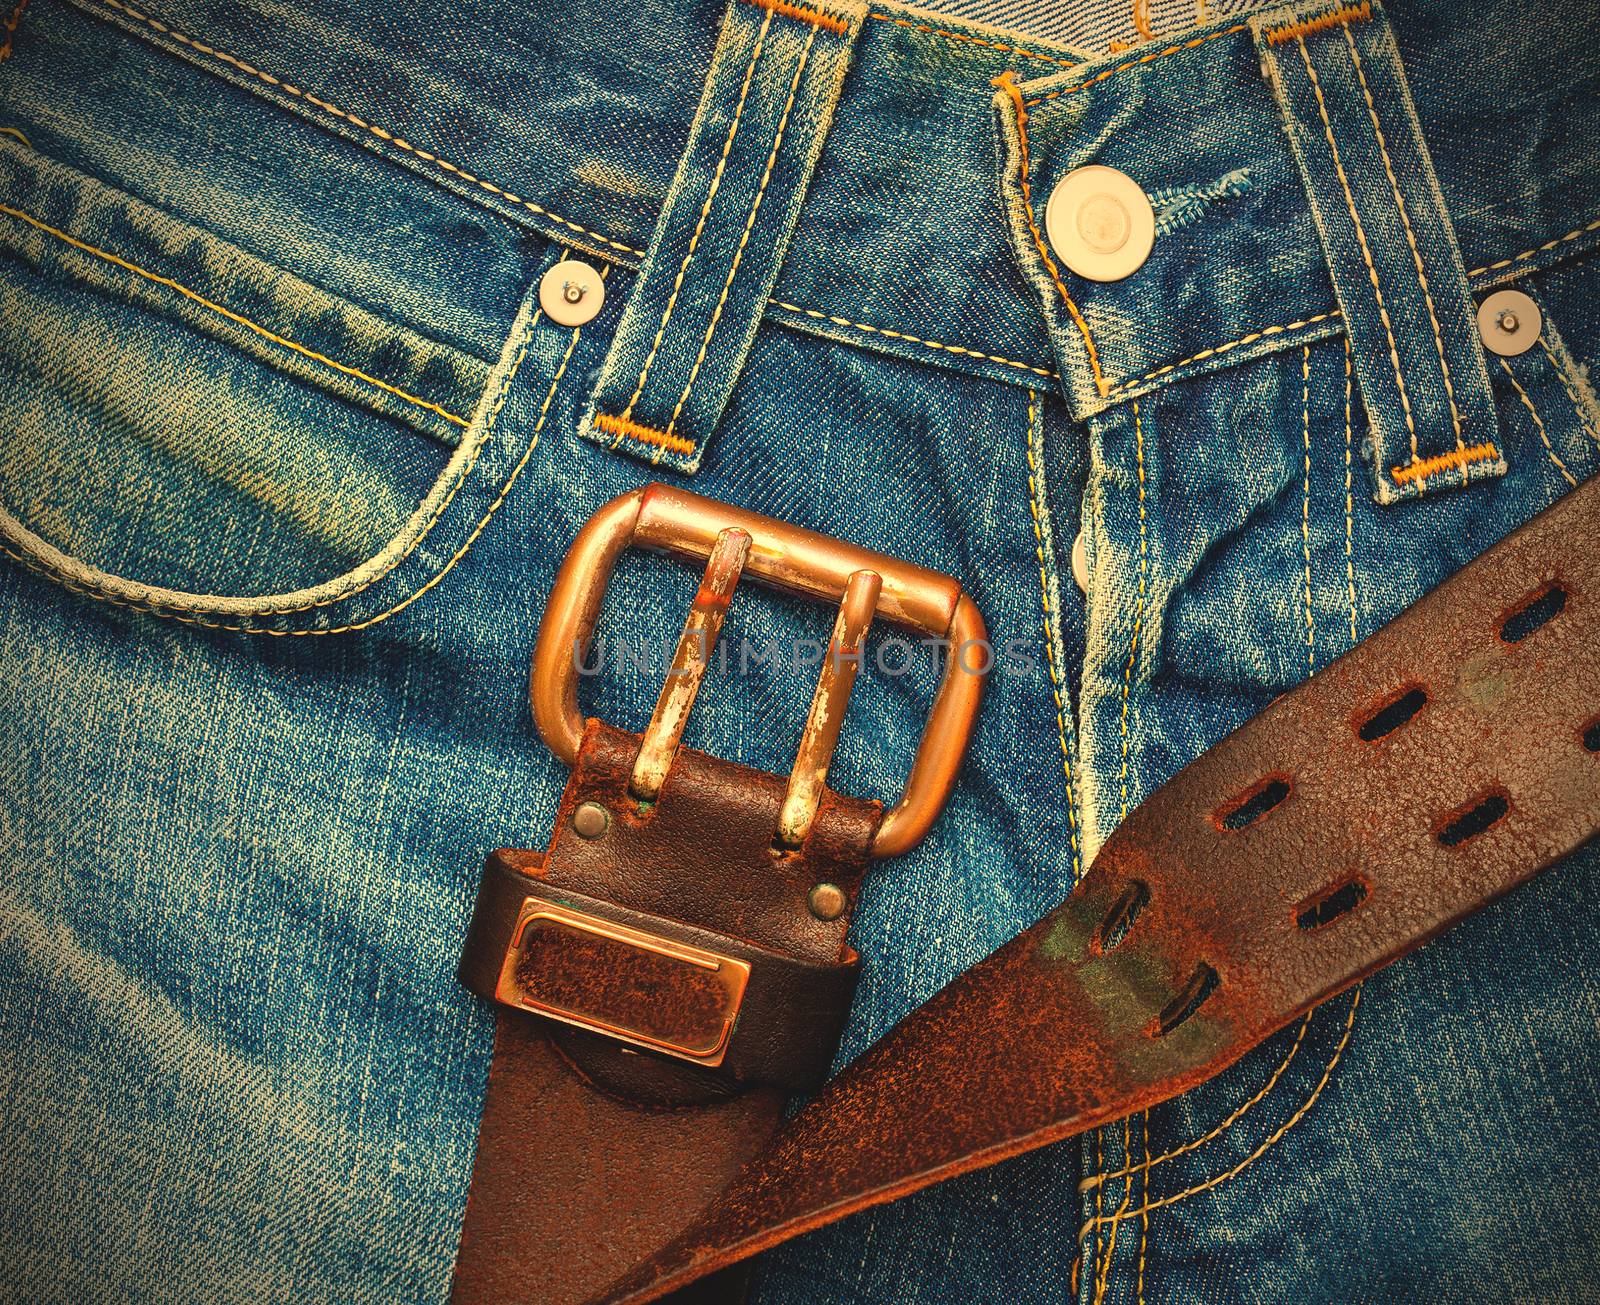 Vintage leather belt with metal buckle on old blue jeans. instagram image retro style